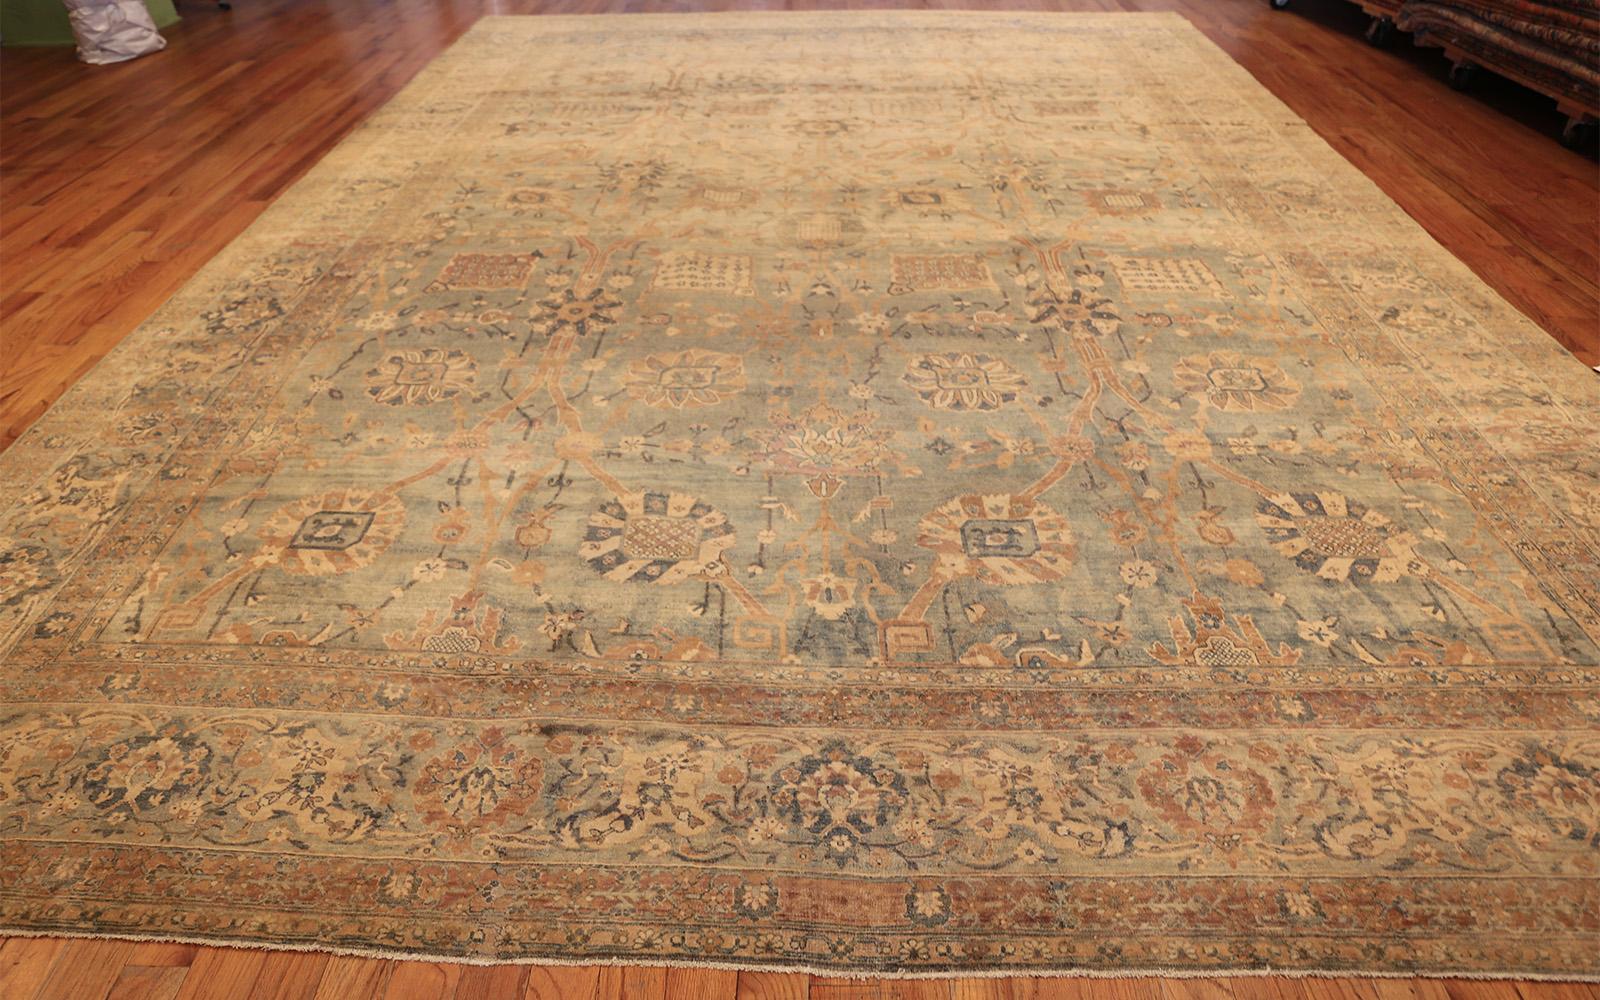 Beautiful Vase Design Antique Persian Kerman Rug, Country of Origin: Persia, Circa Date: Late 19th Century. Size: 11 ft 6 in x 16 ft 10 in (3.51 m x 5.13 m)

Kerman carpets are prized for their wide range of colors and designs. They use a broad